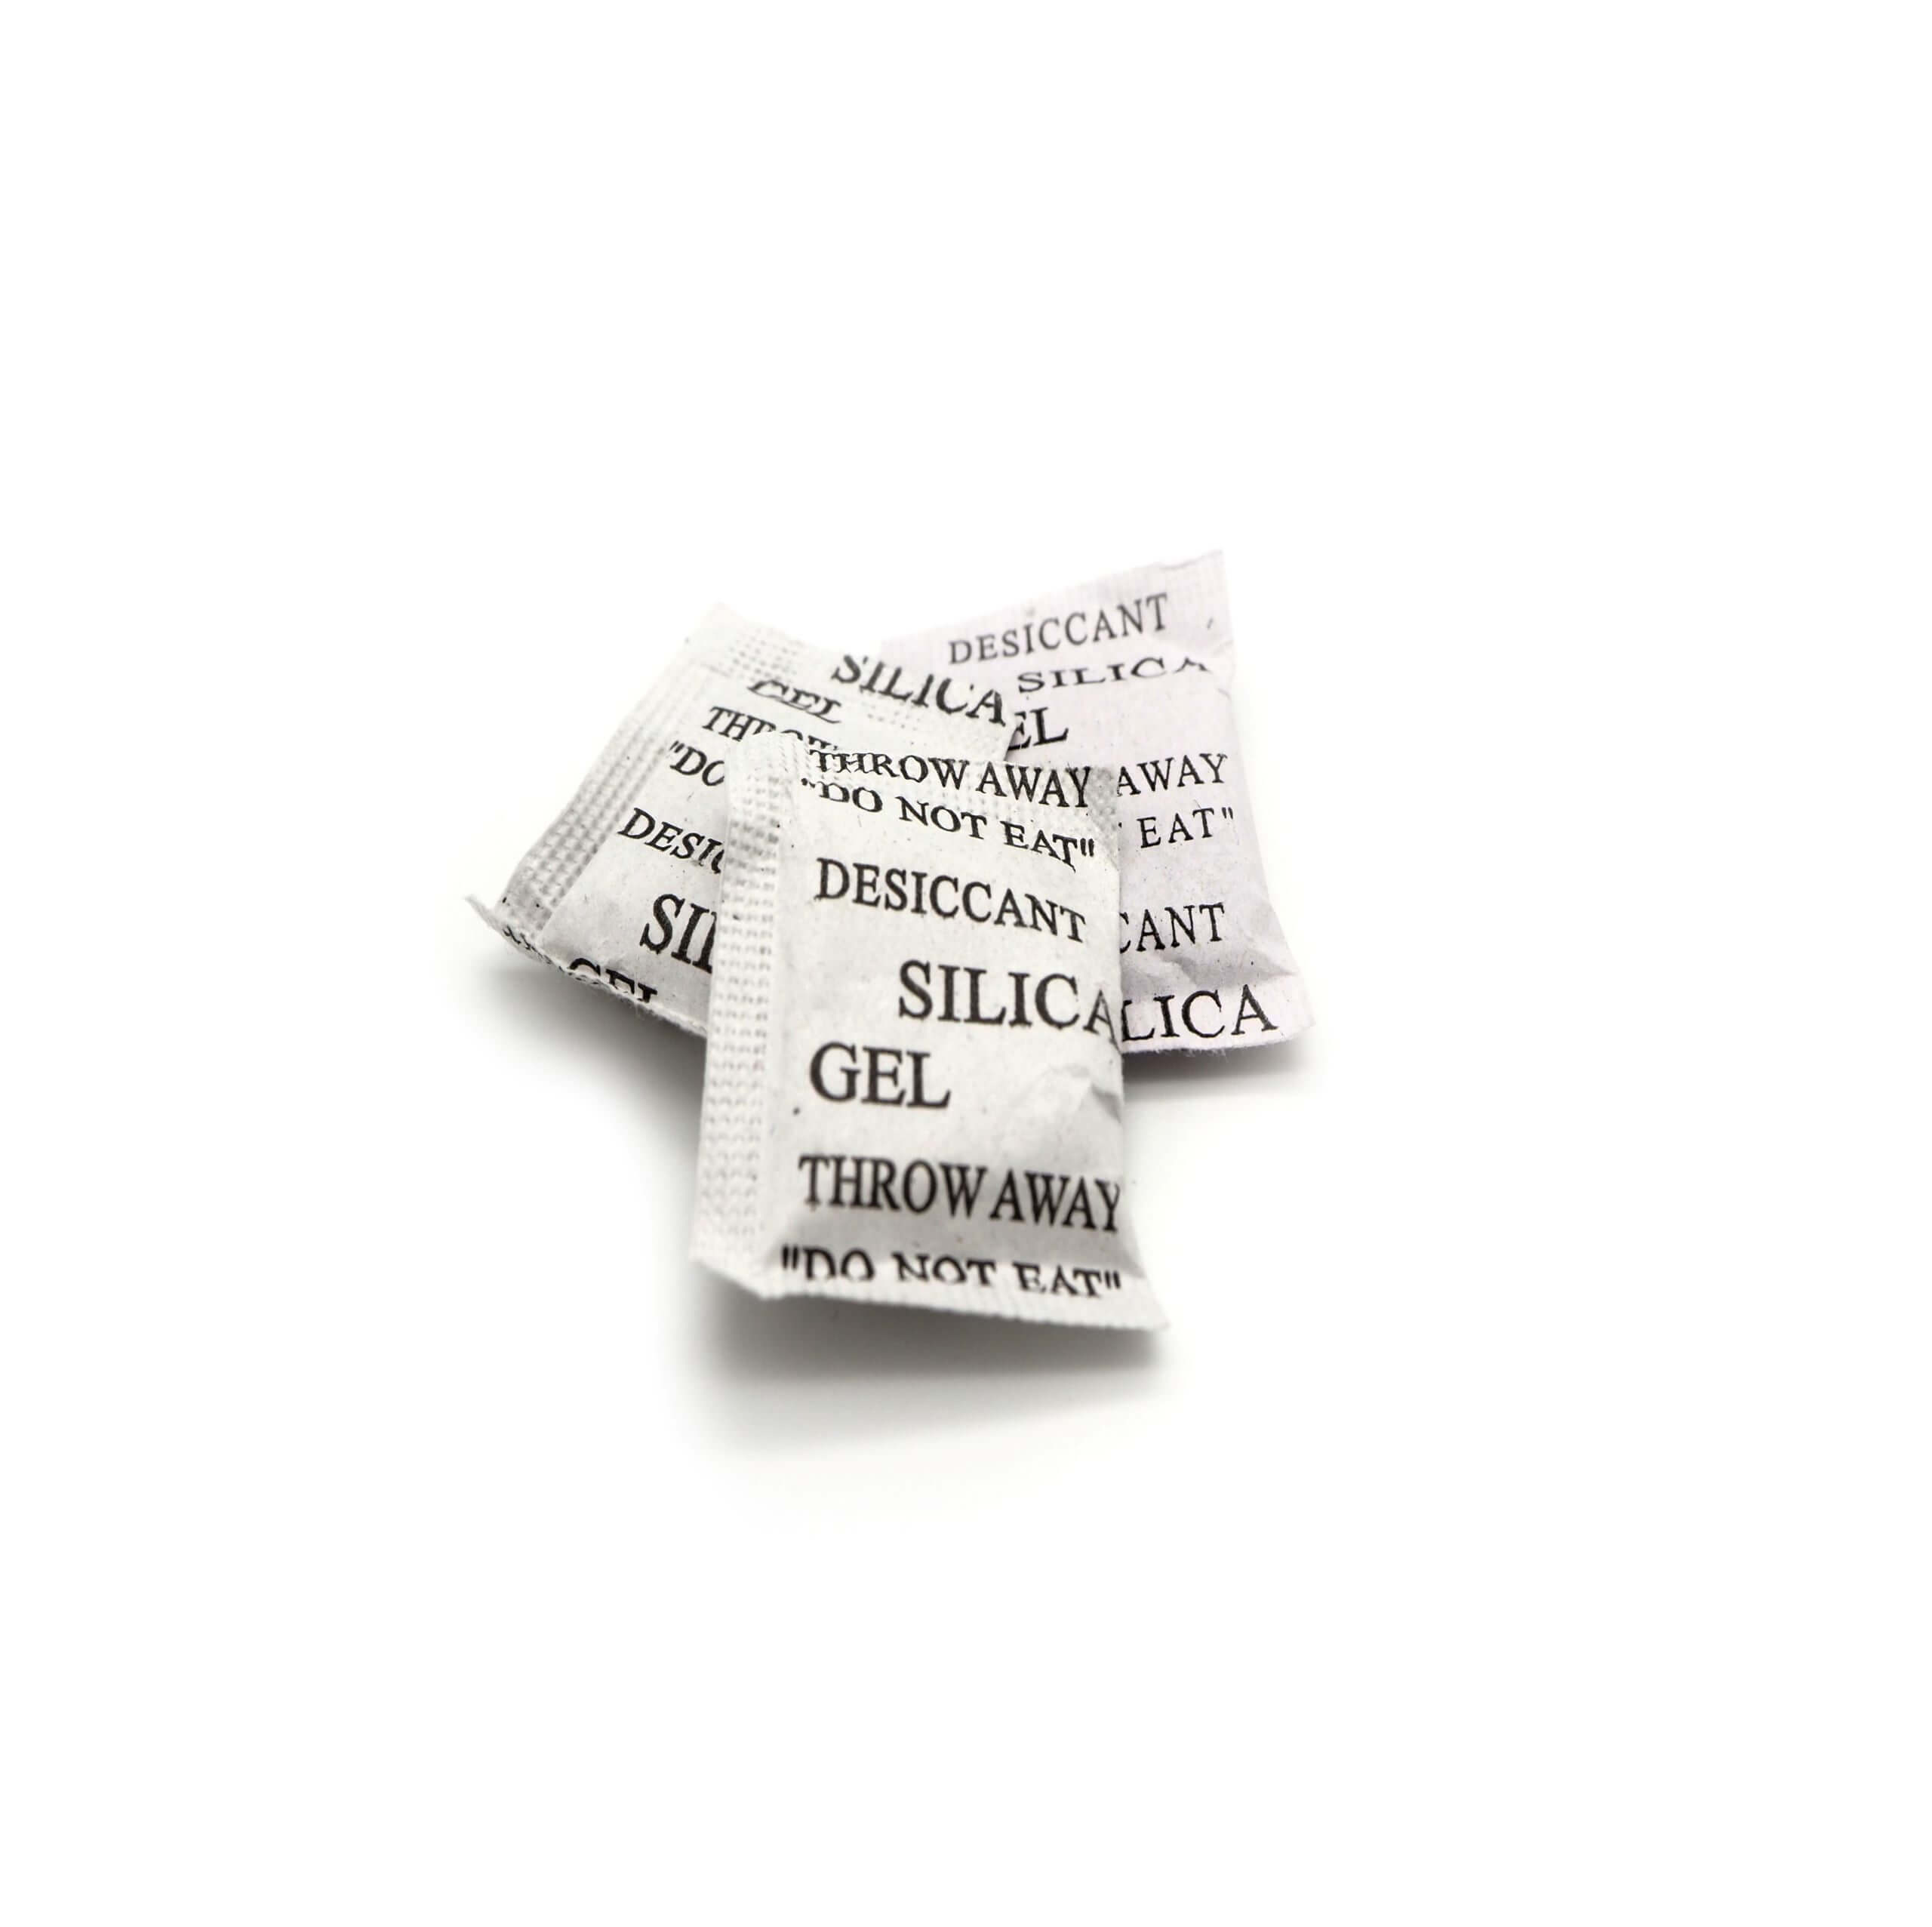 An image of Silica Gel Pouches & Crystals.